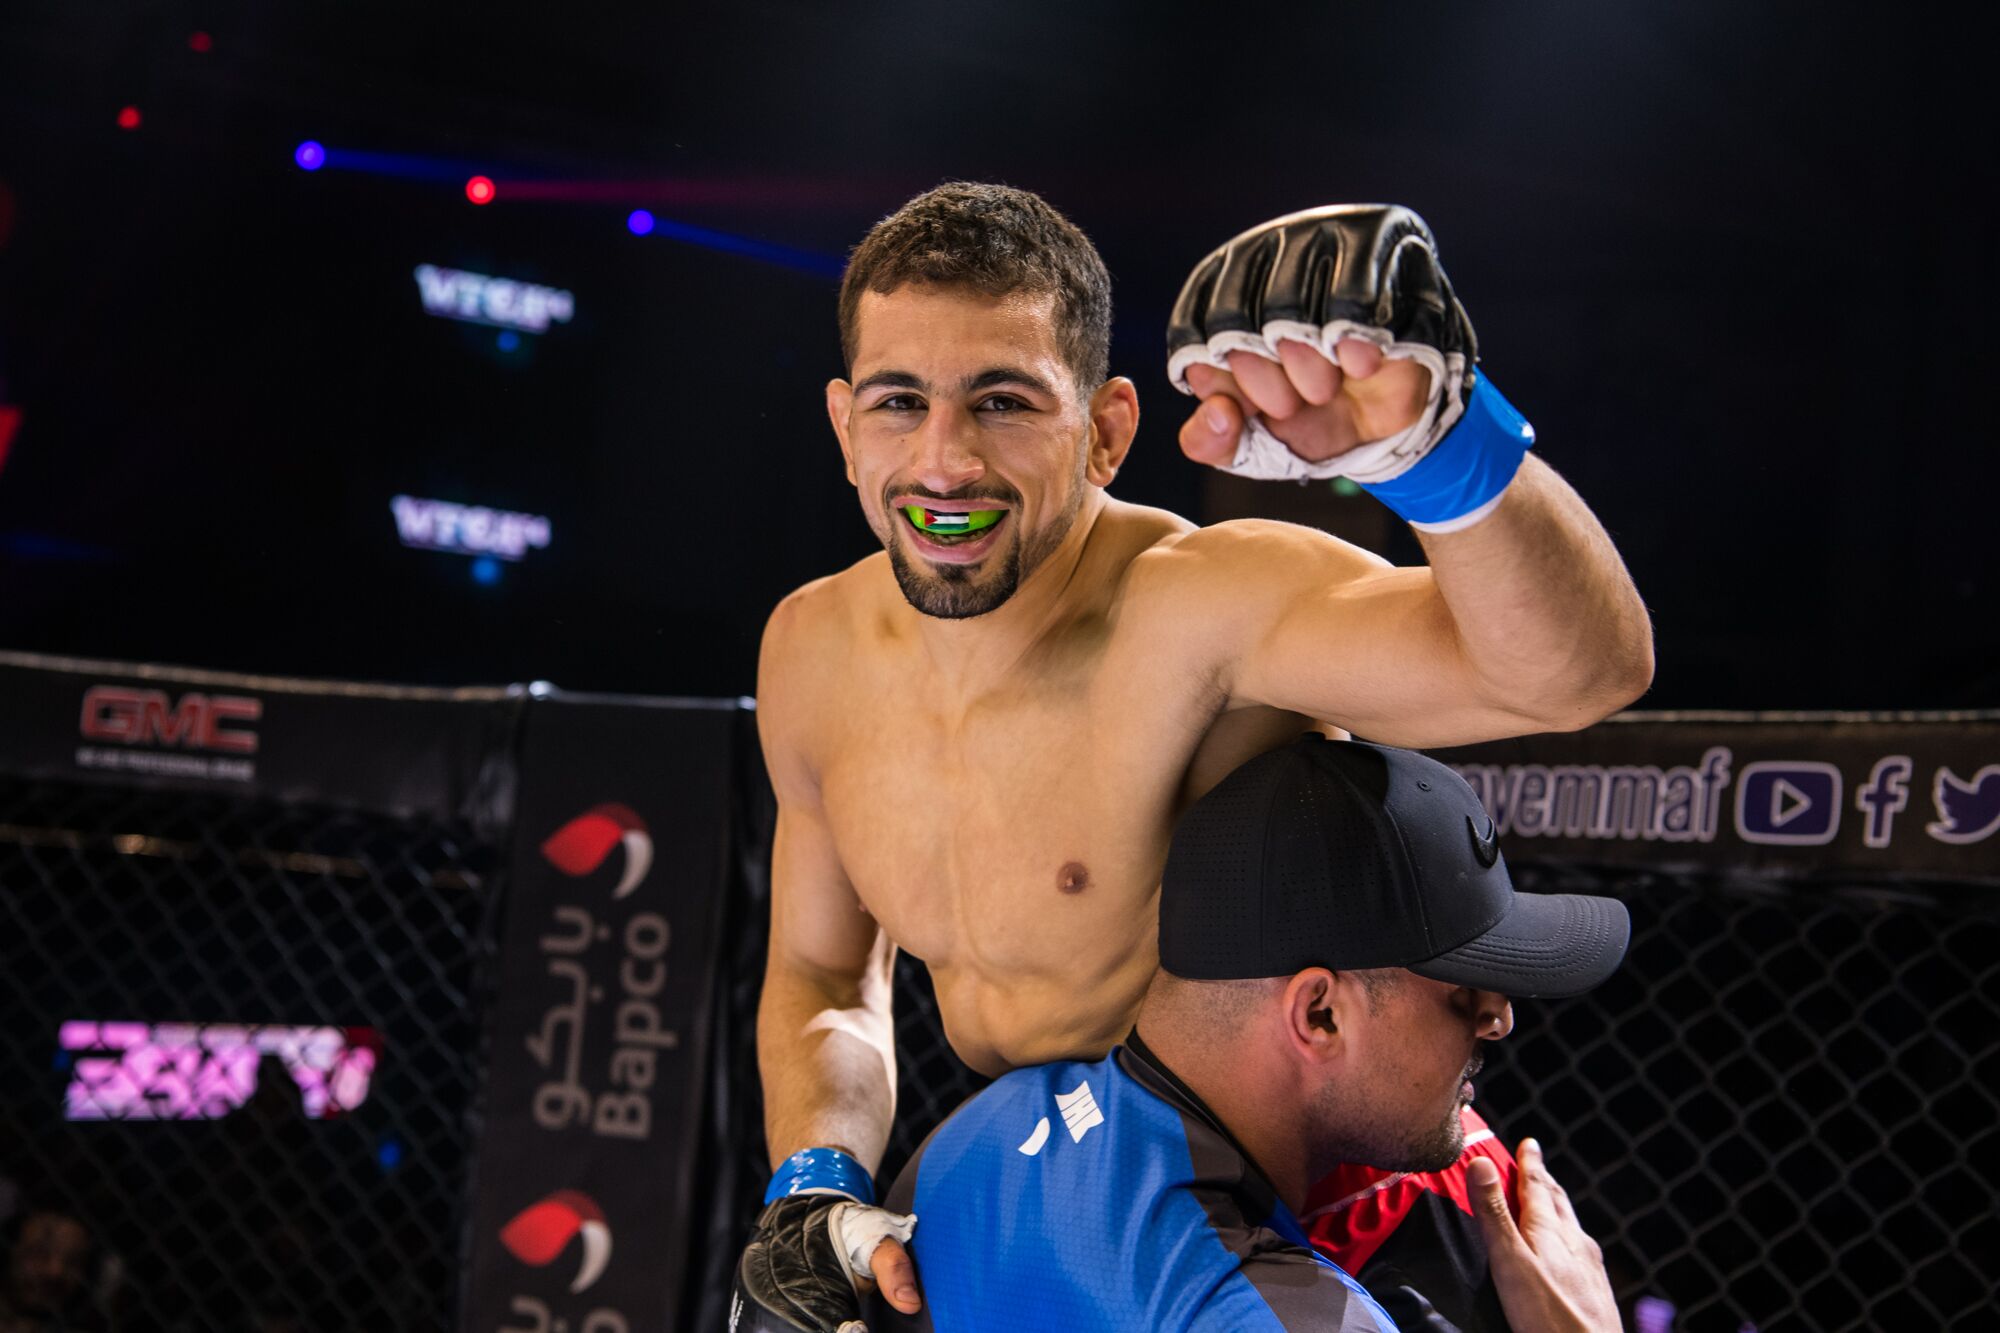 Former BRAVE CF champ Al-Selwady returns to the site of his crowning achievement - BraveFC